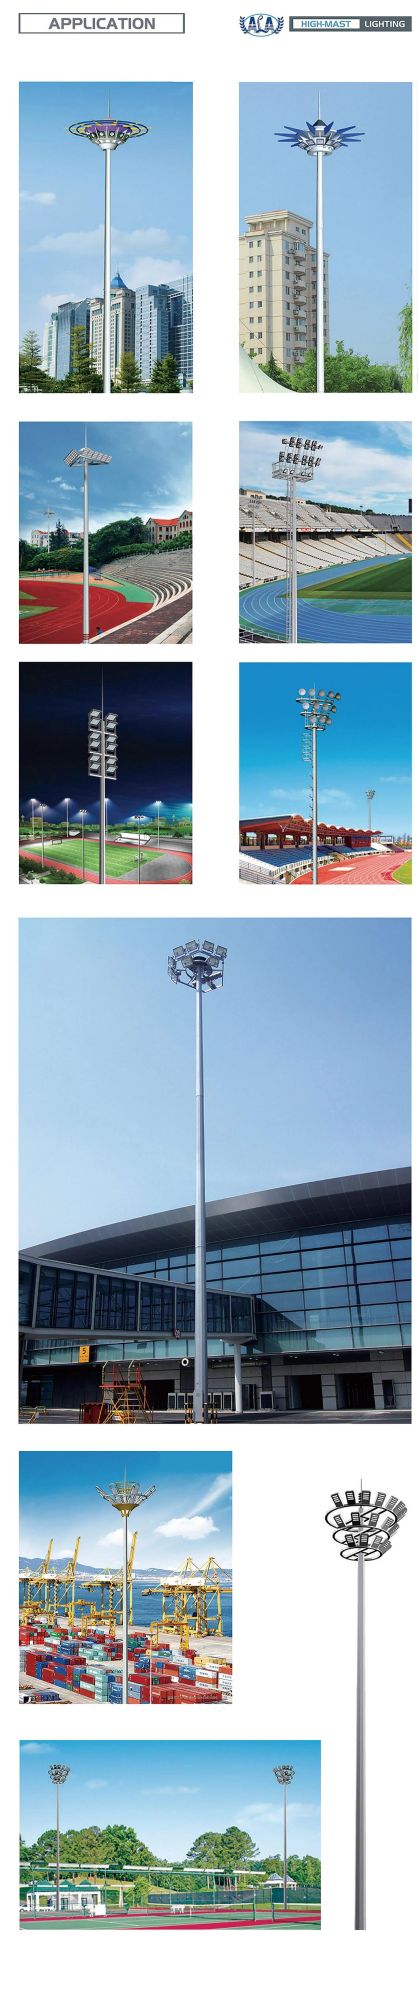 Ala 100W Airport Stadium High Mast Lamp with Raising and Lowering Device